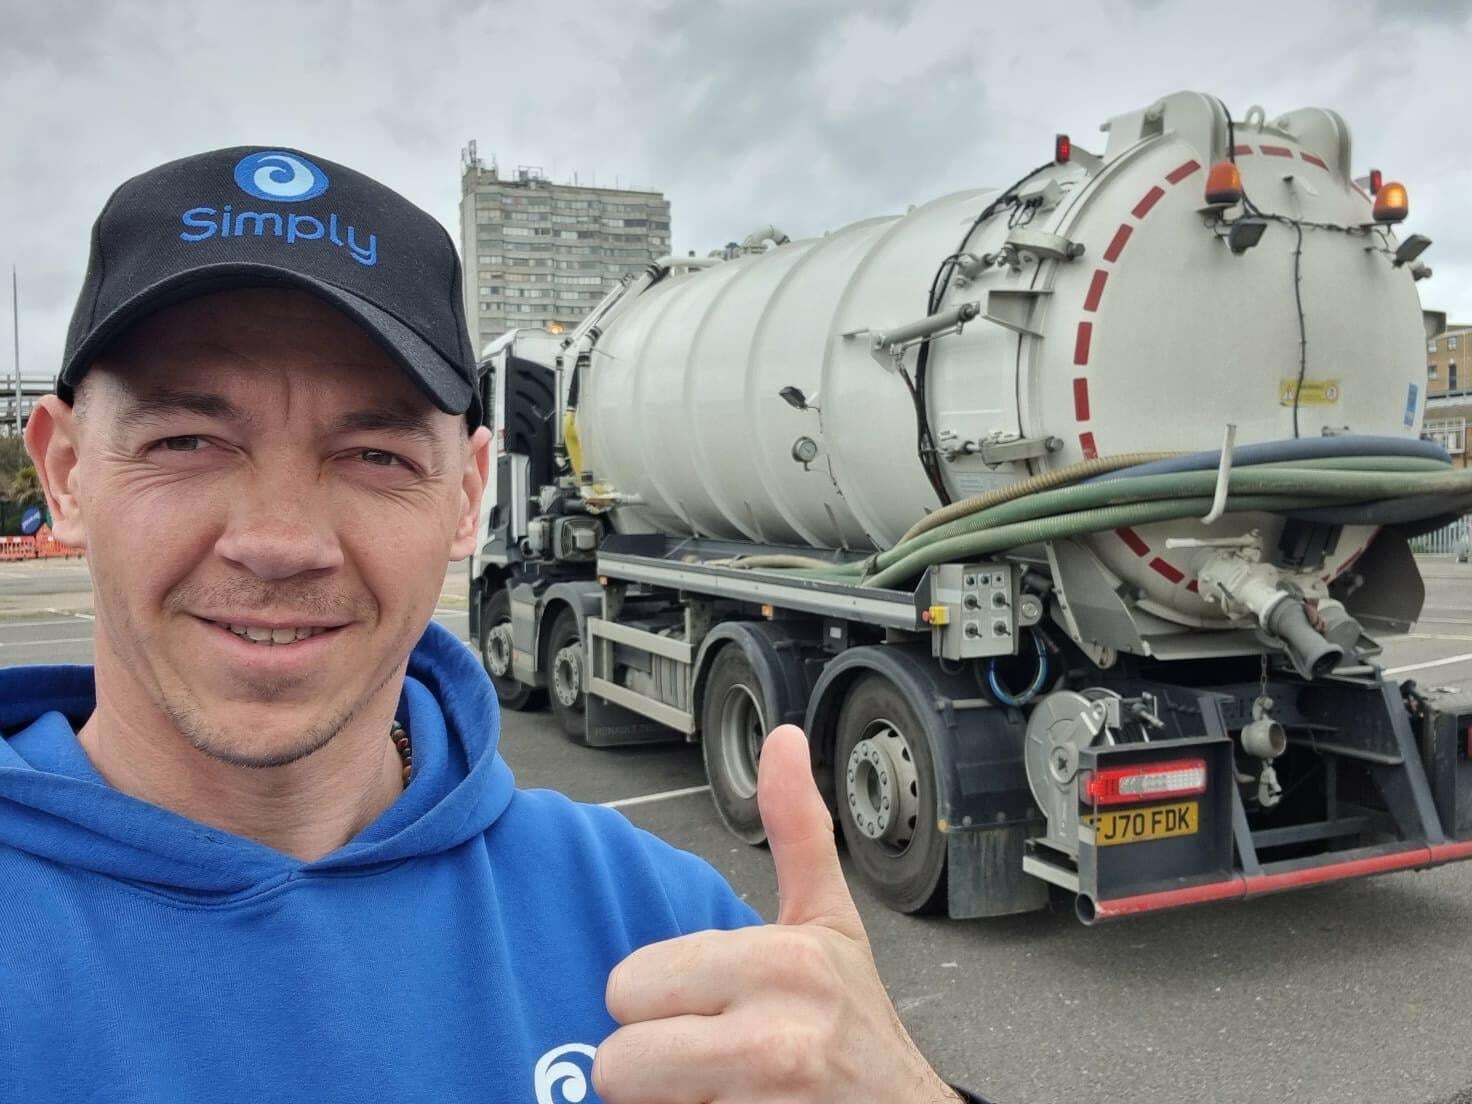 A DAY IN THE LIFE OF TANKER DRIVER, MILAN